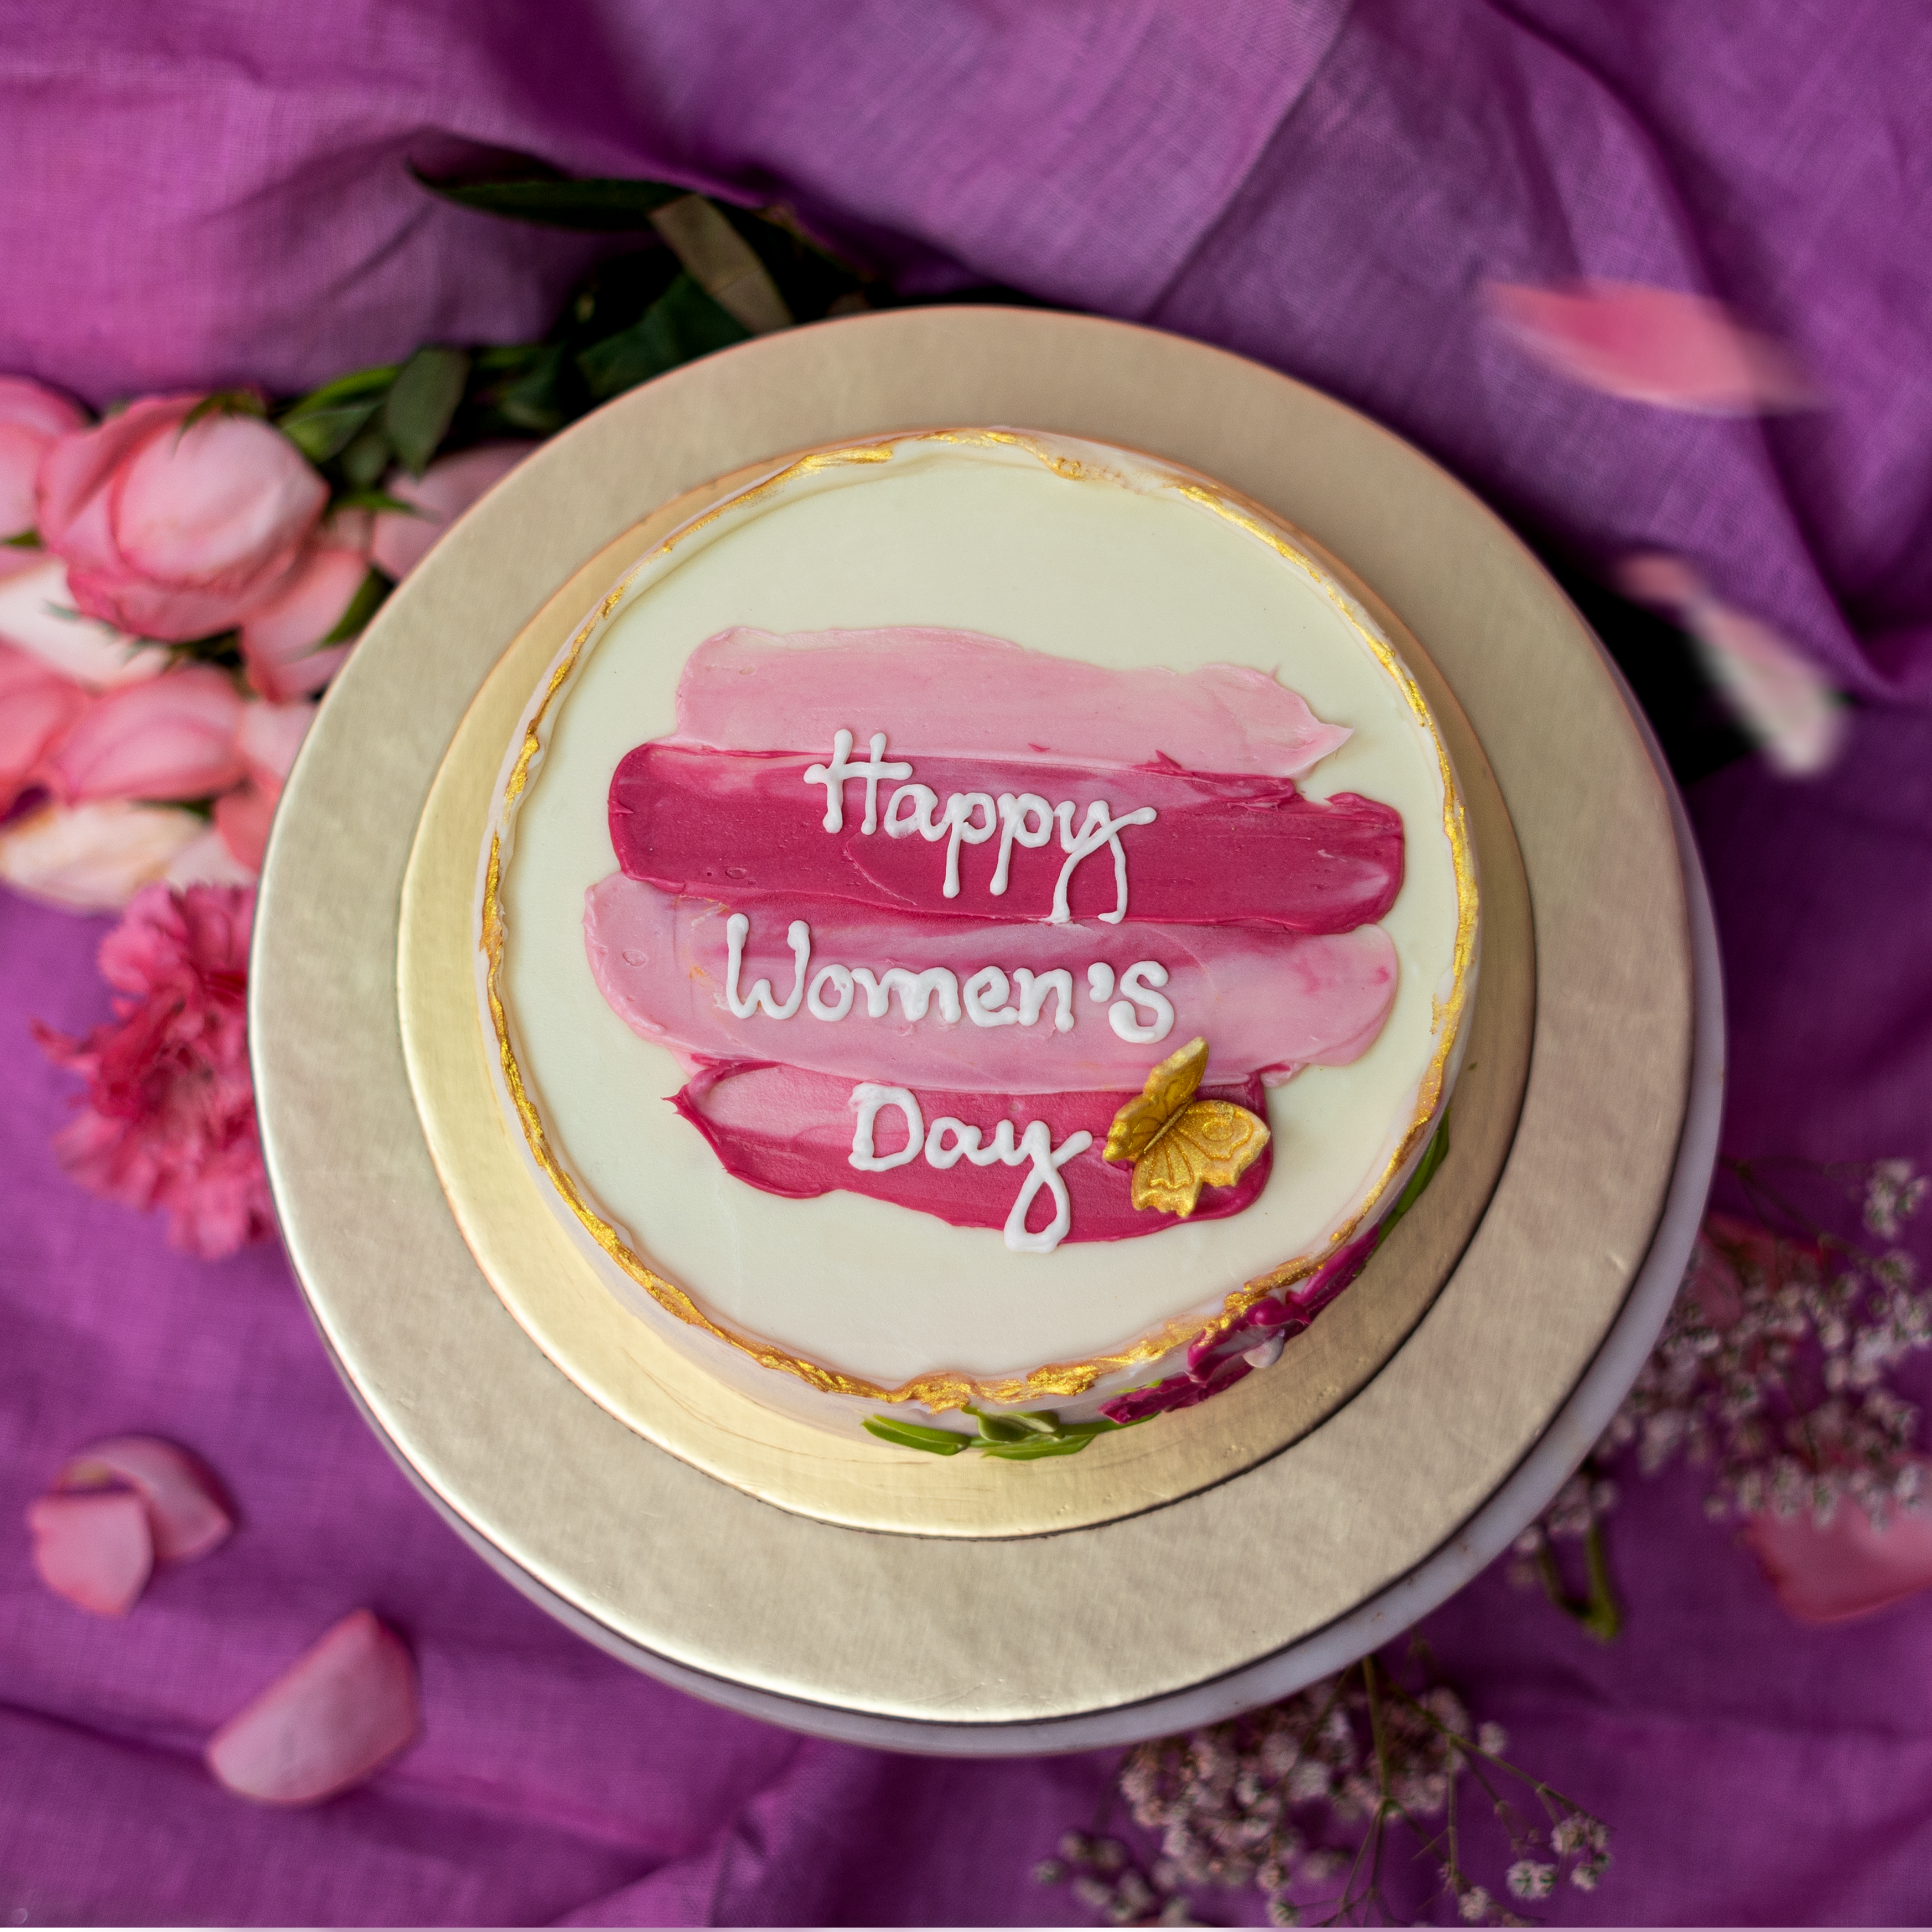 International Women's Day: 8 Glamorous Cakes For 8th of March